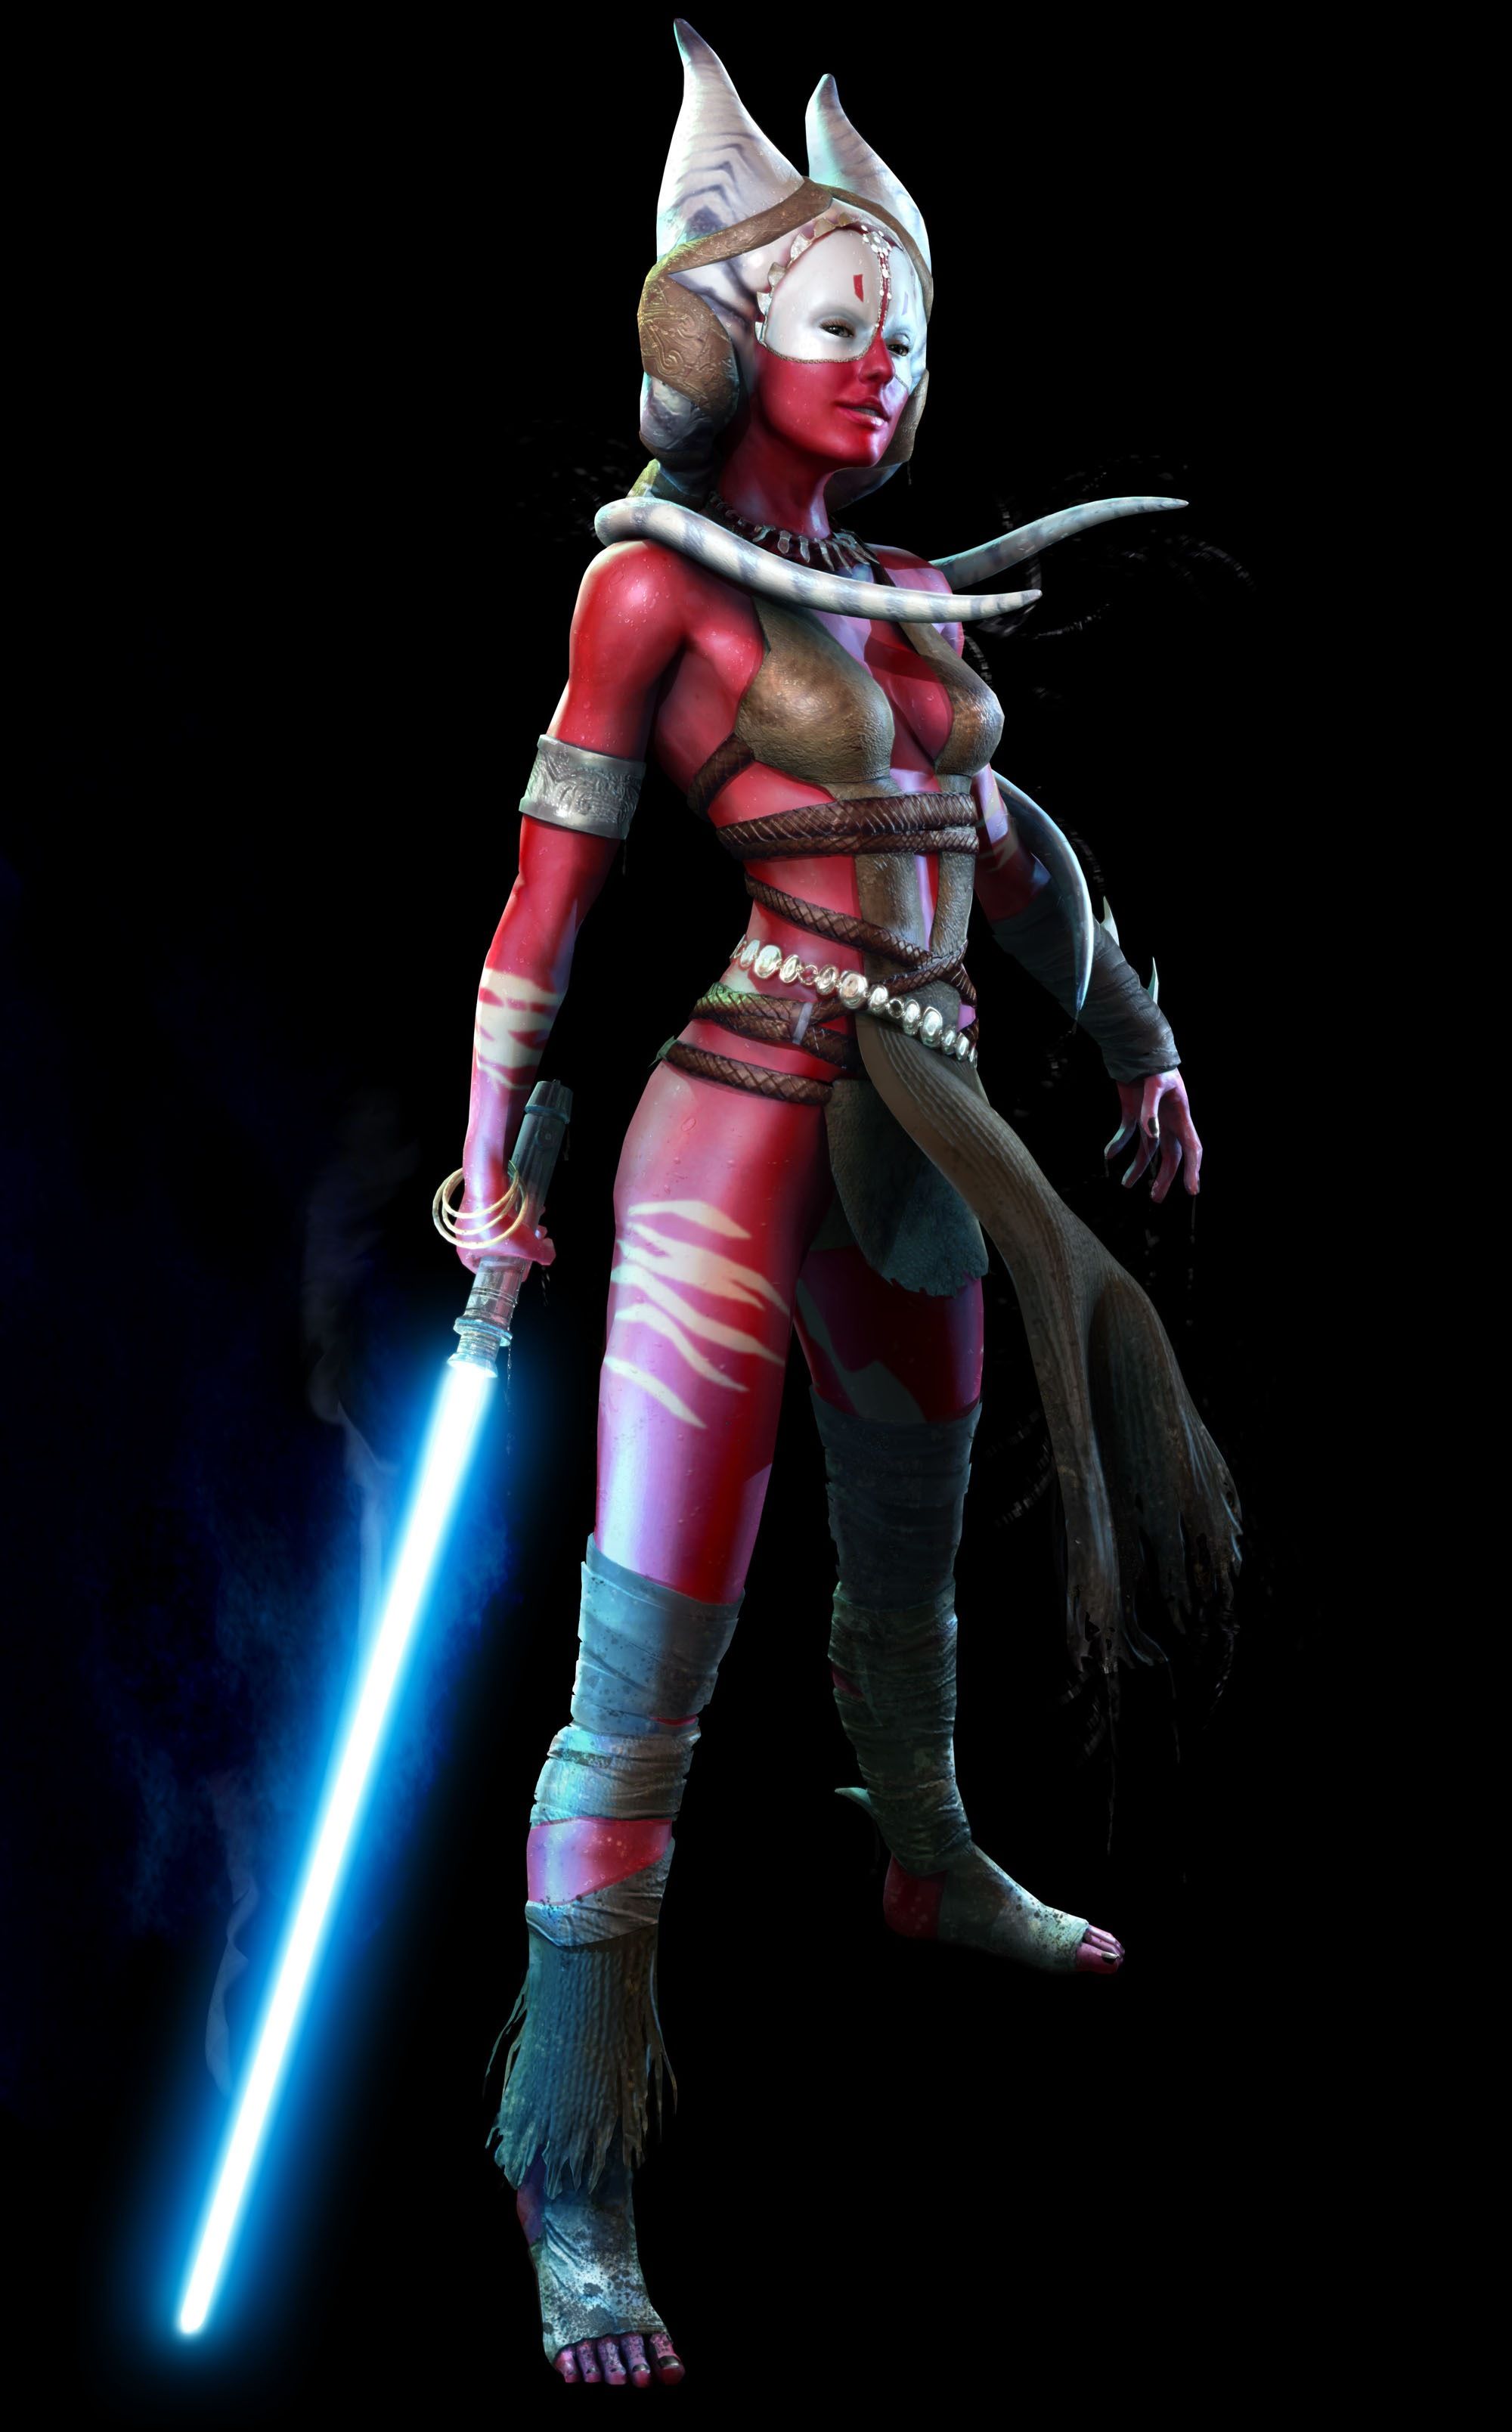 Shaak Ti Sexy Wallpapers